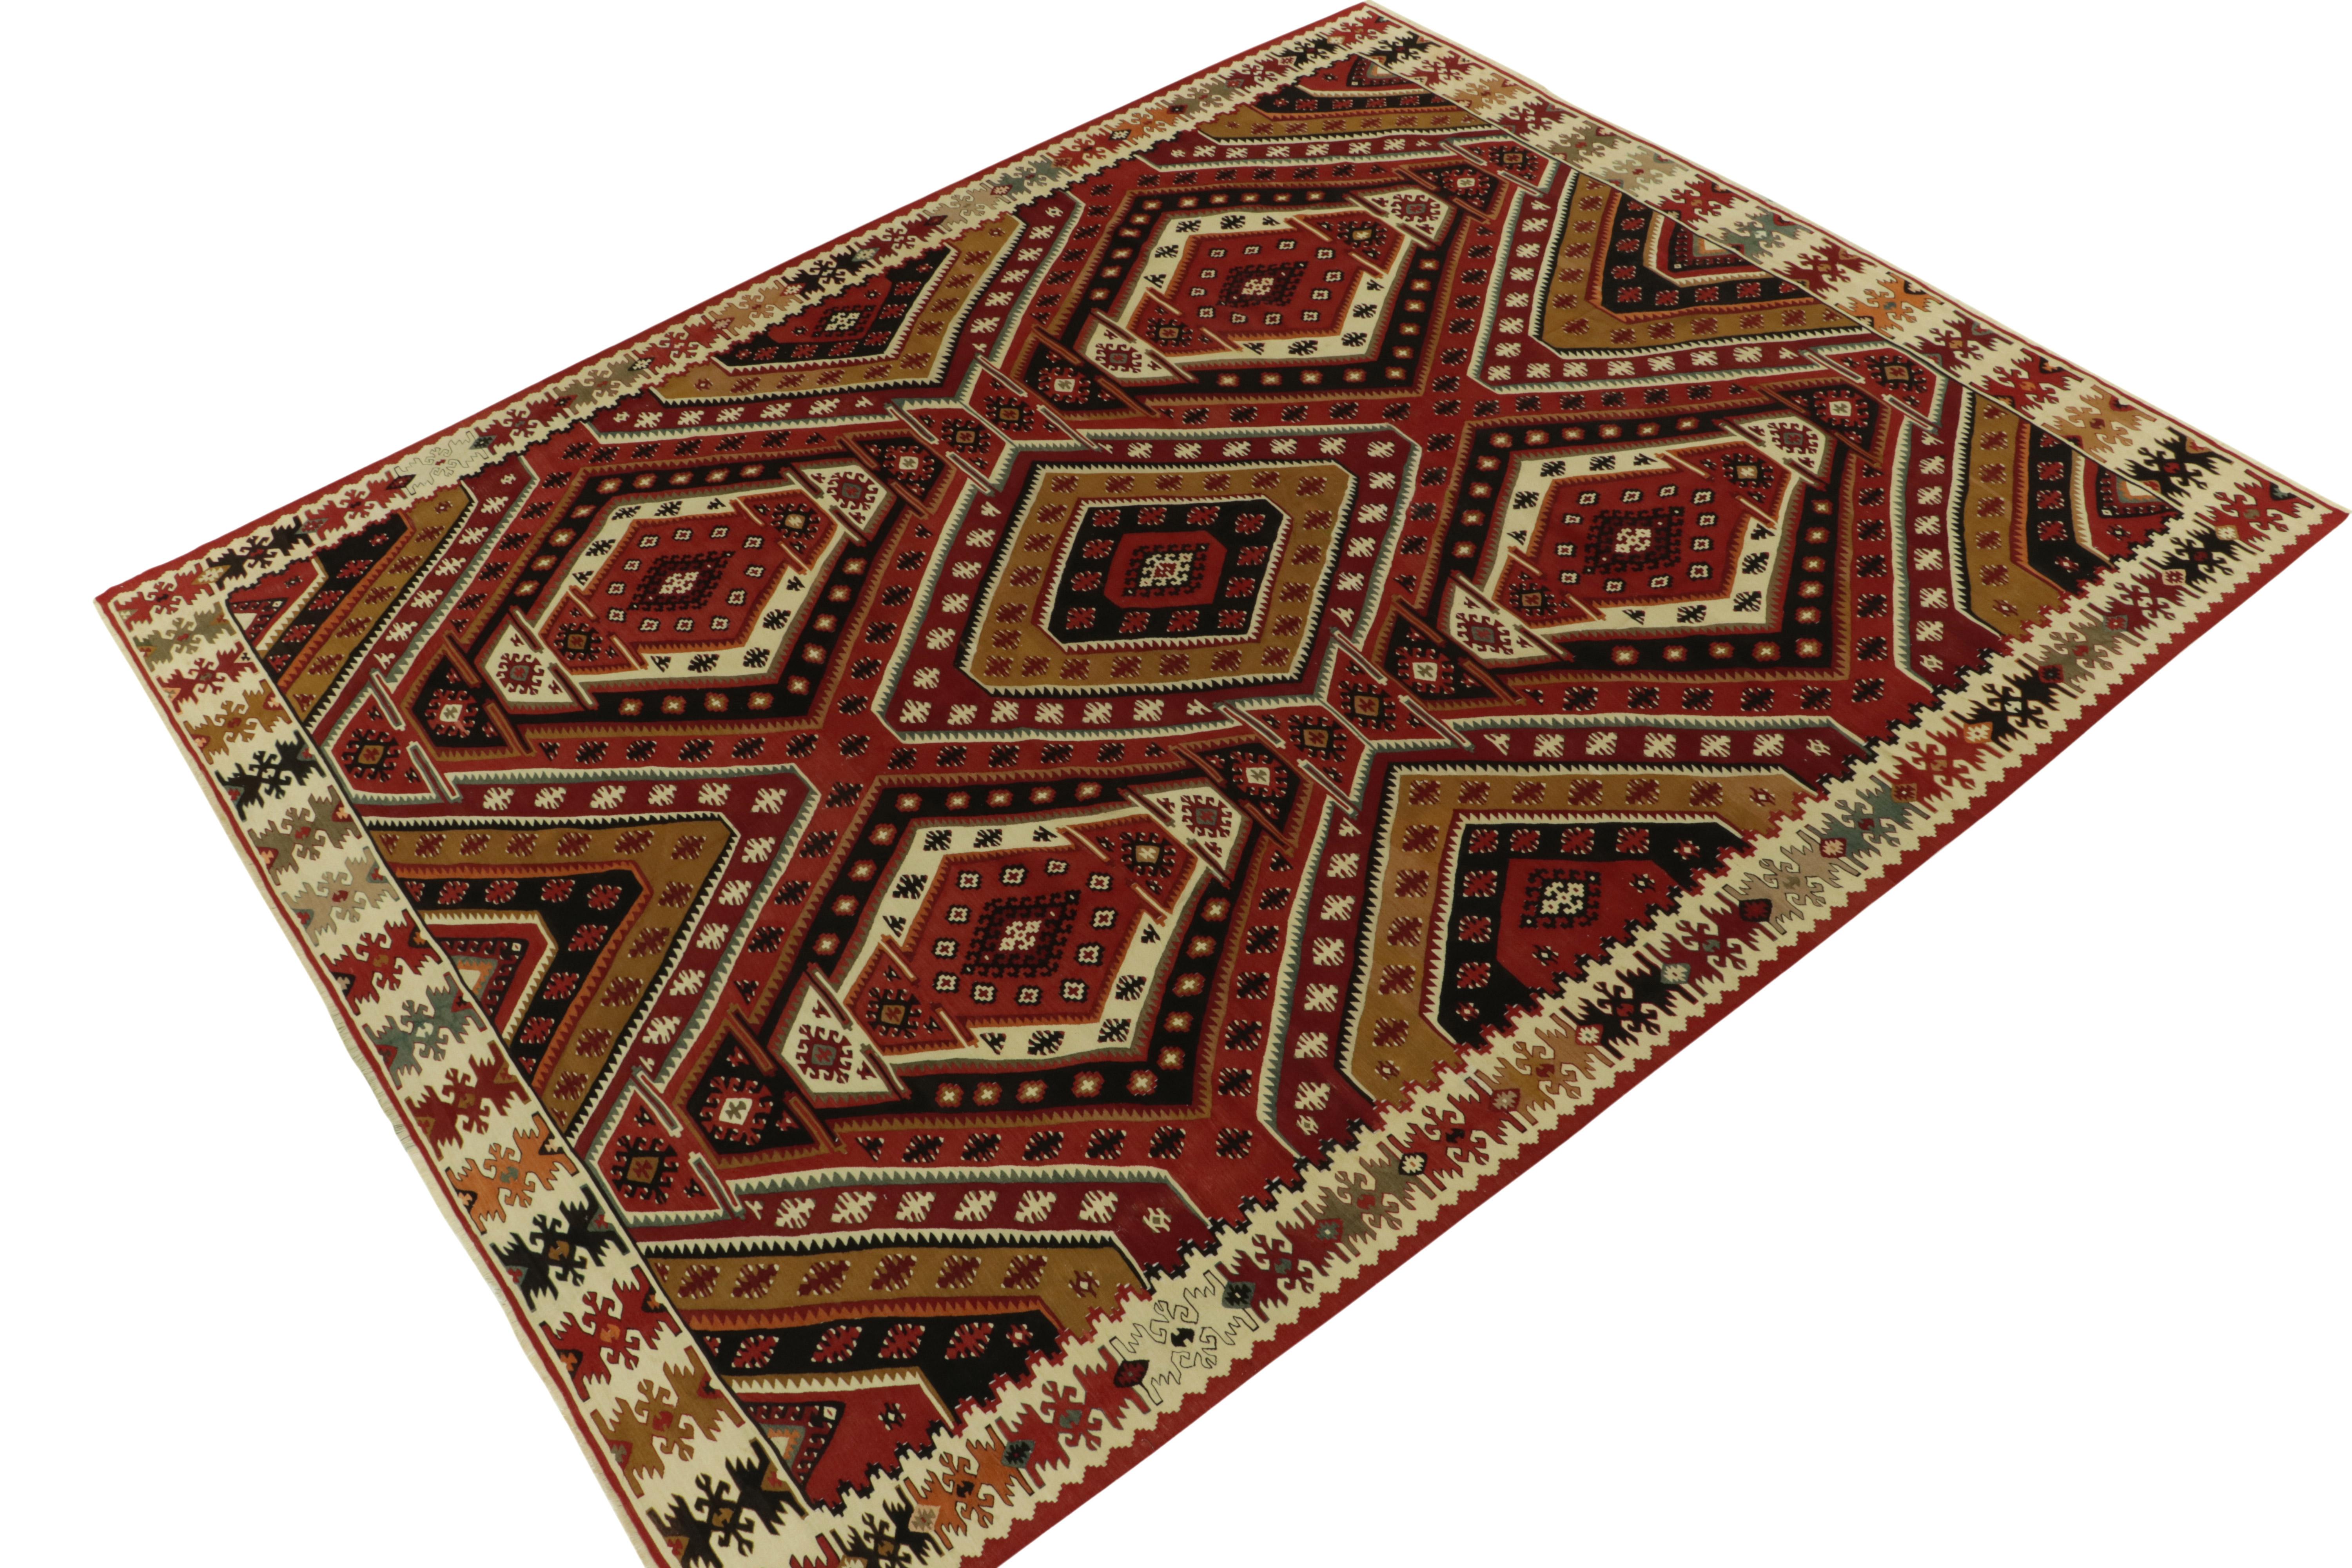 Handwoven in wool originating from Turkey circa 1950-1960, this vintage Kilim rug enjoys a culmination of unique and rare elements in pristine condition, fantastically spacious graph, and a beautiful border enfolding the exemplary midcentury design.